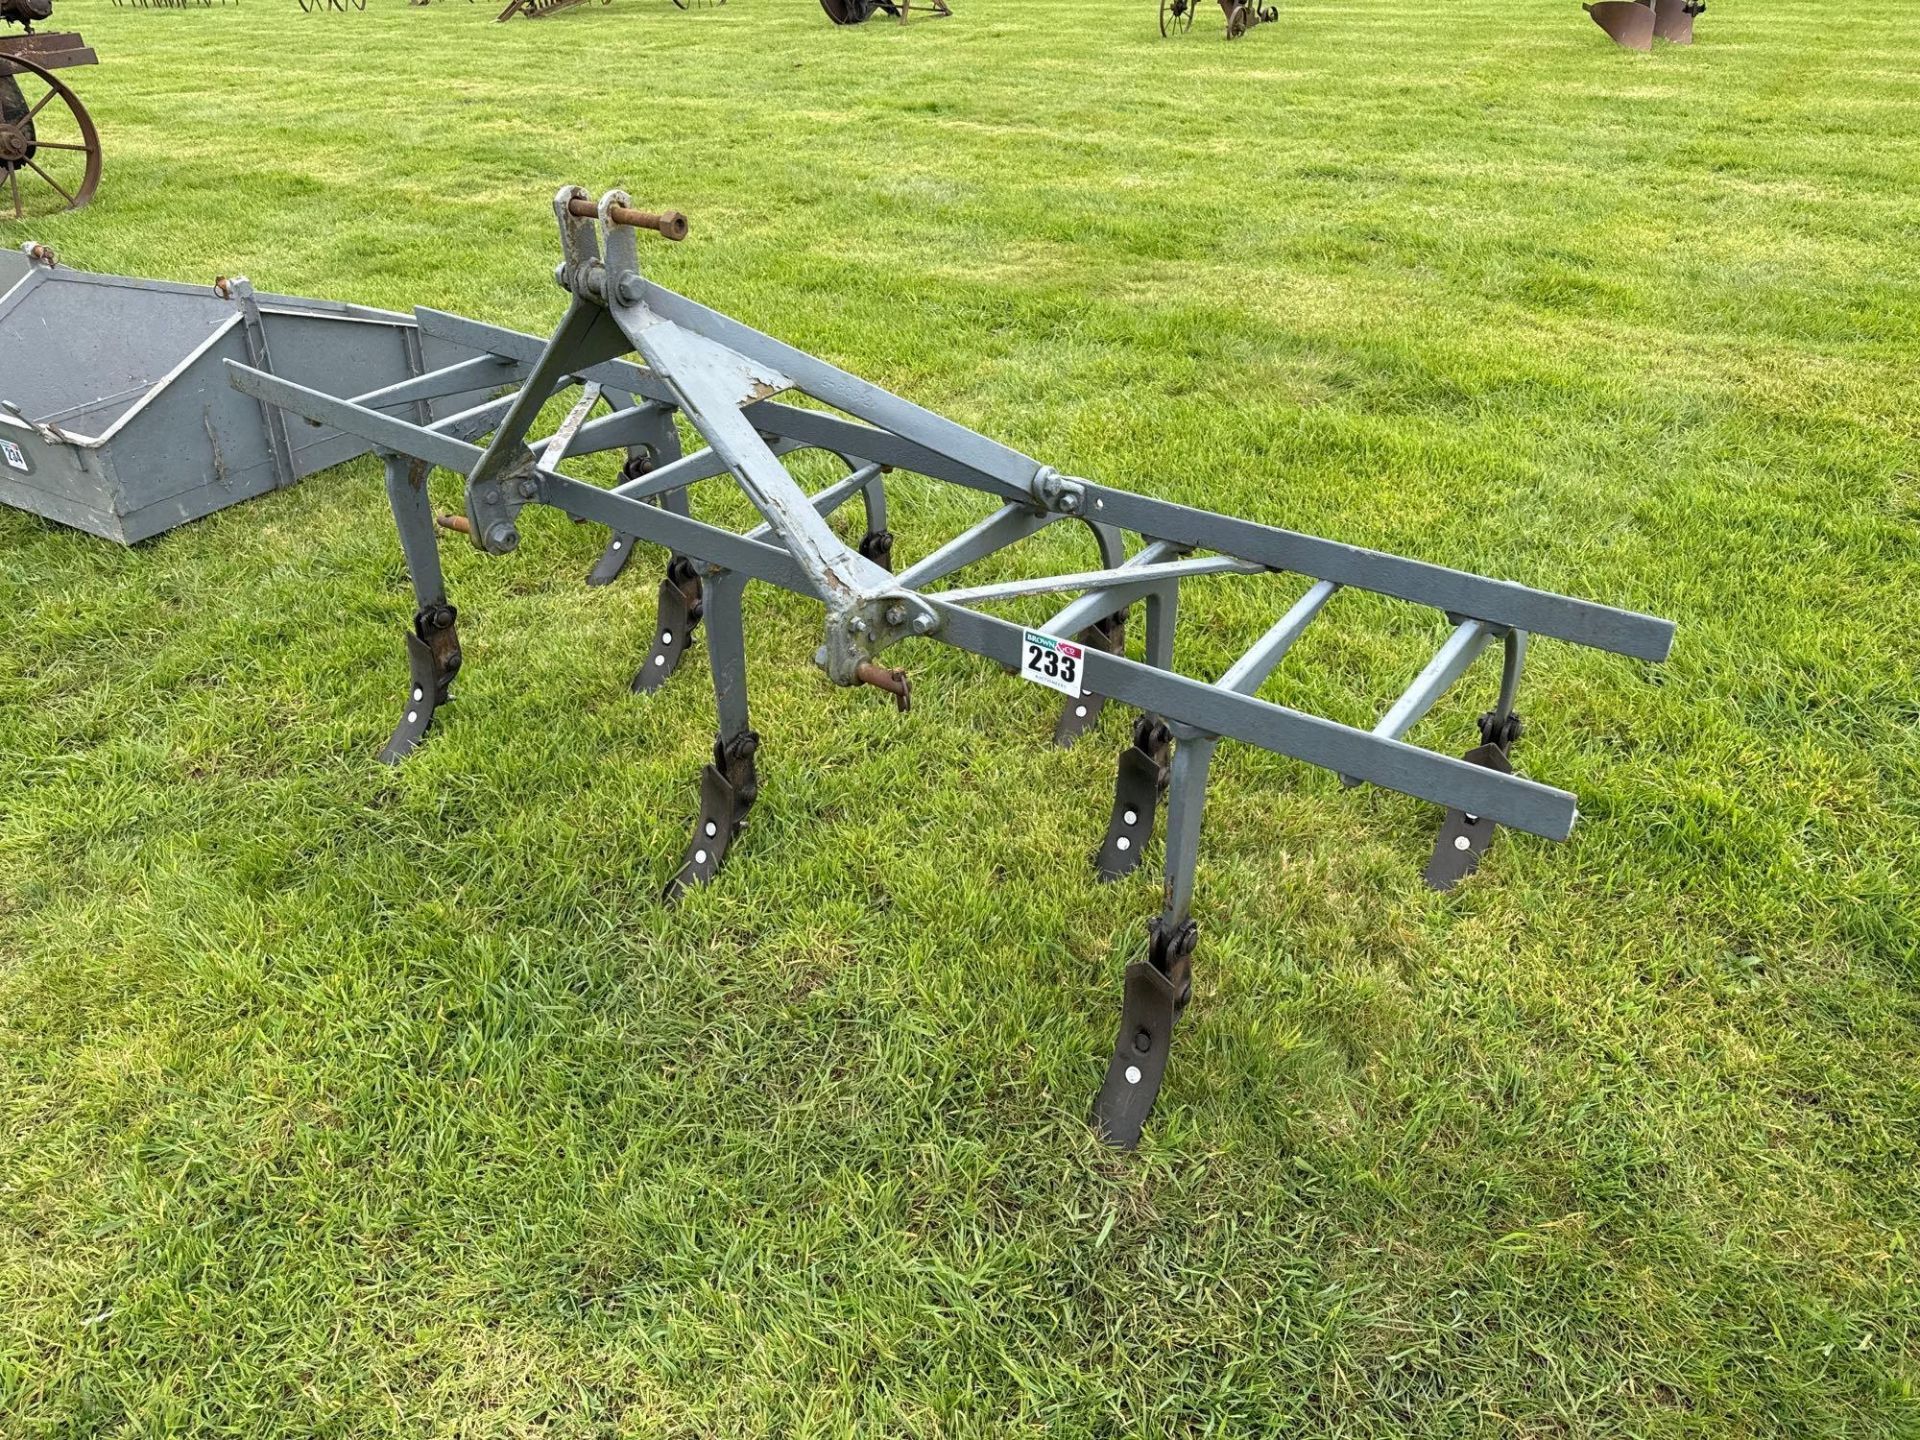 Ferguson 7' tool bar frame with 9No fixed tines